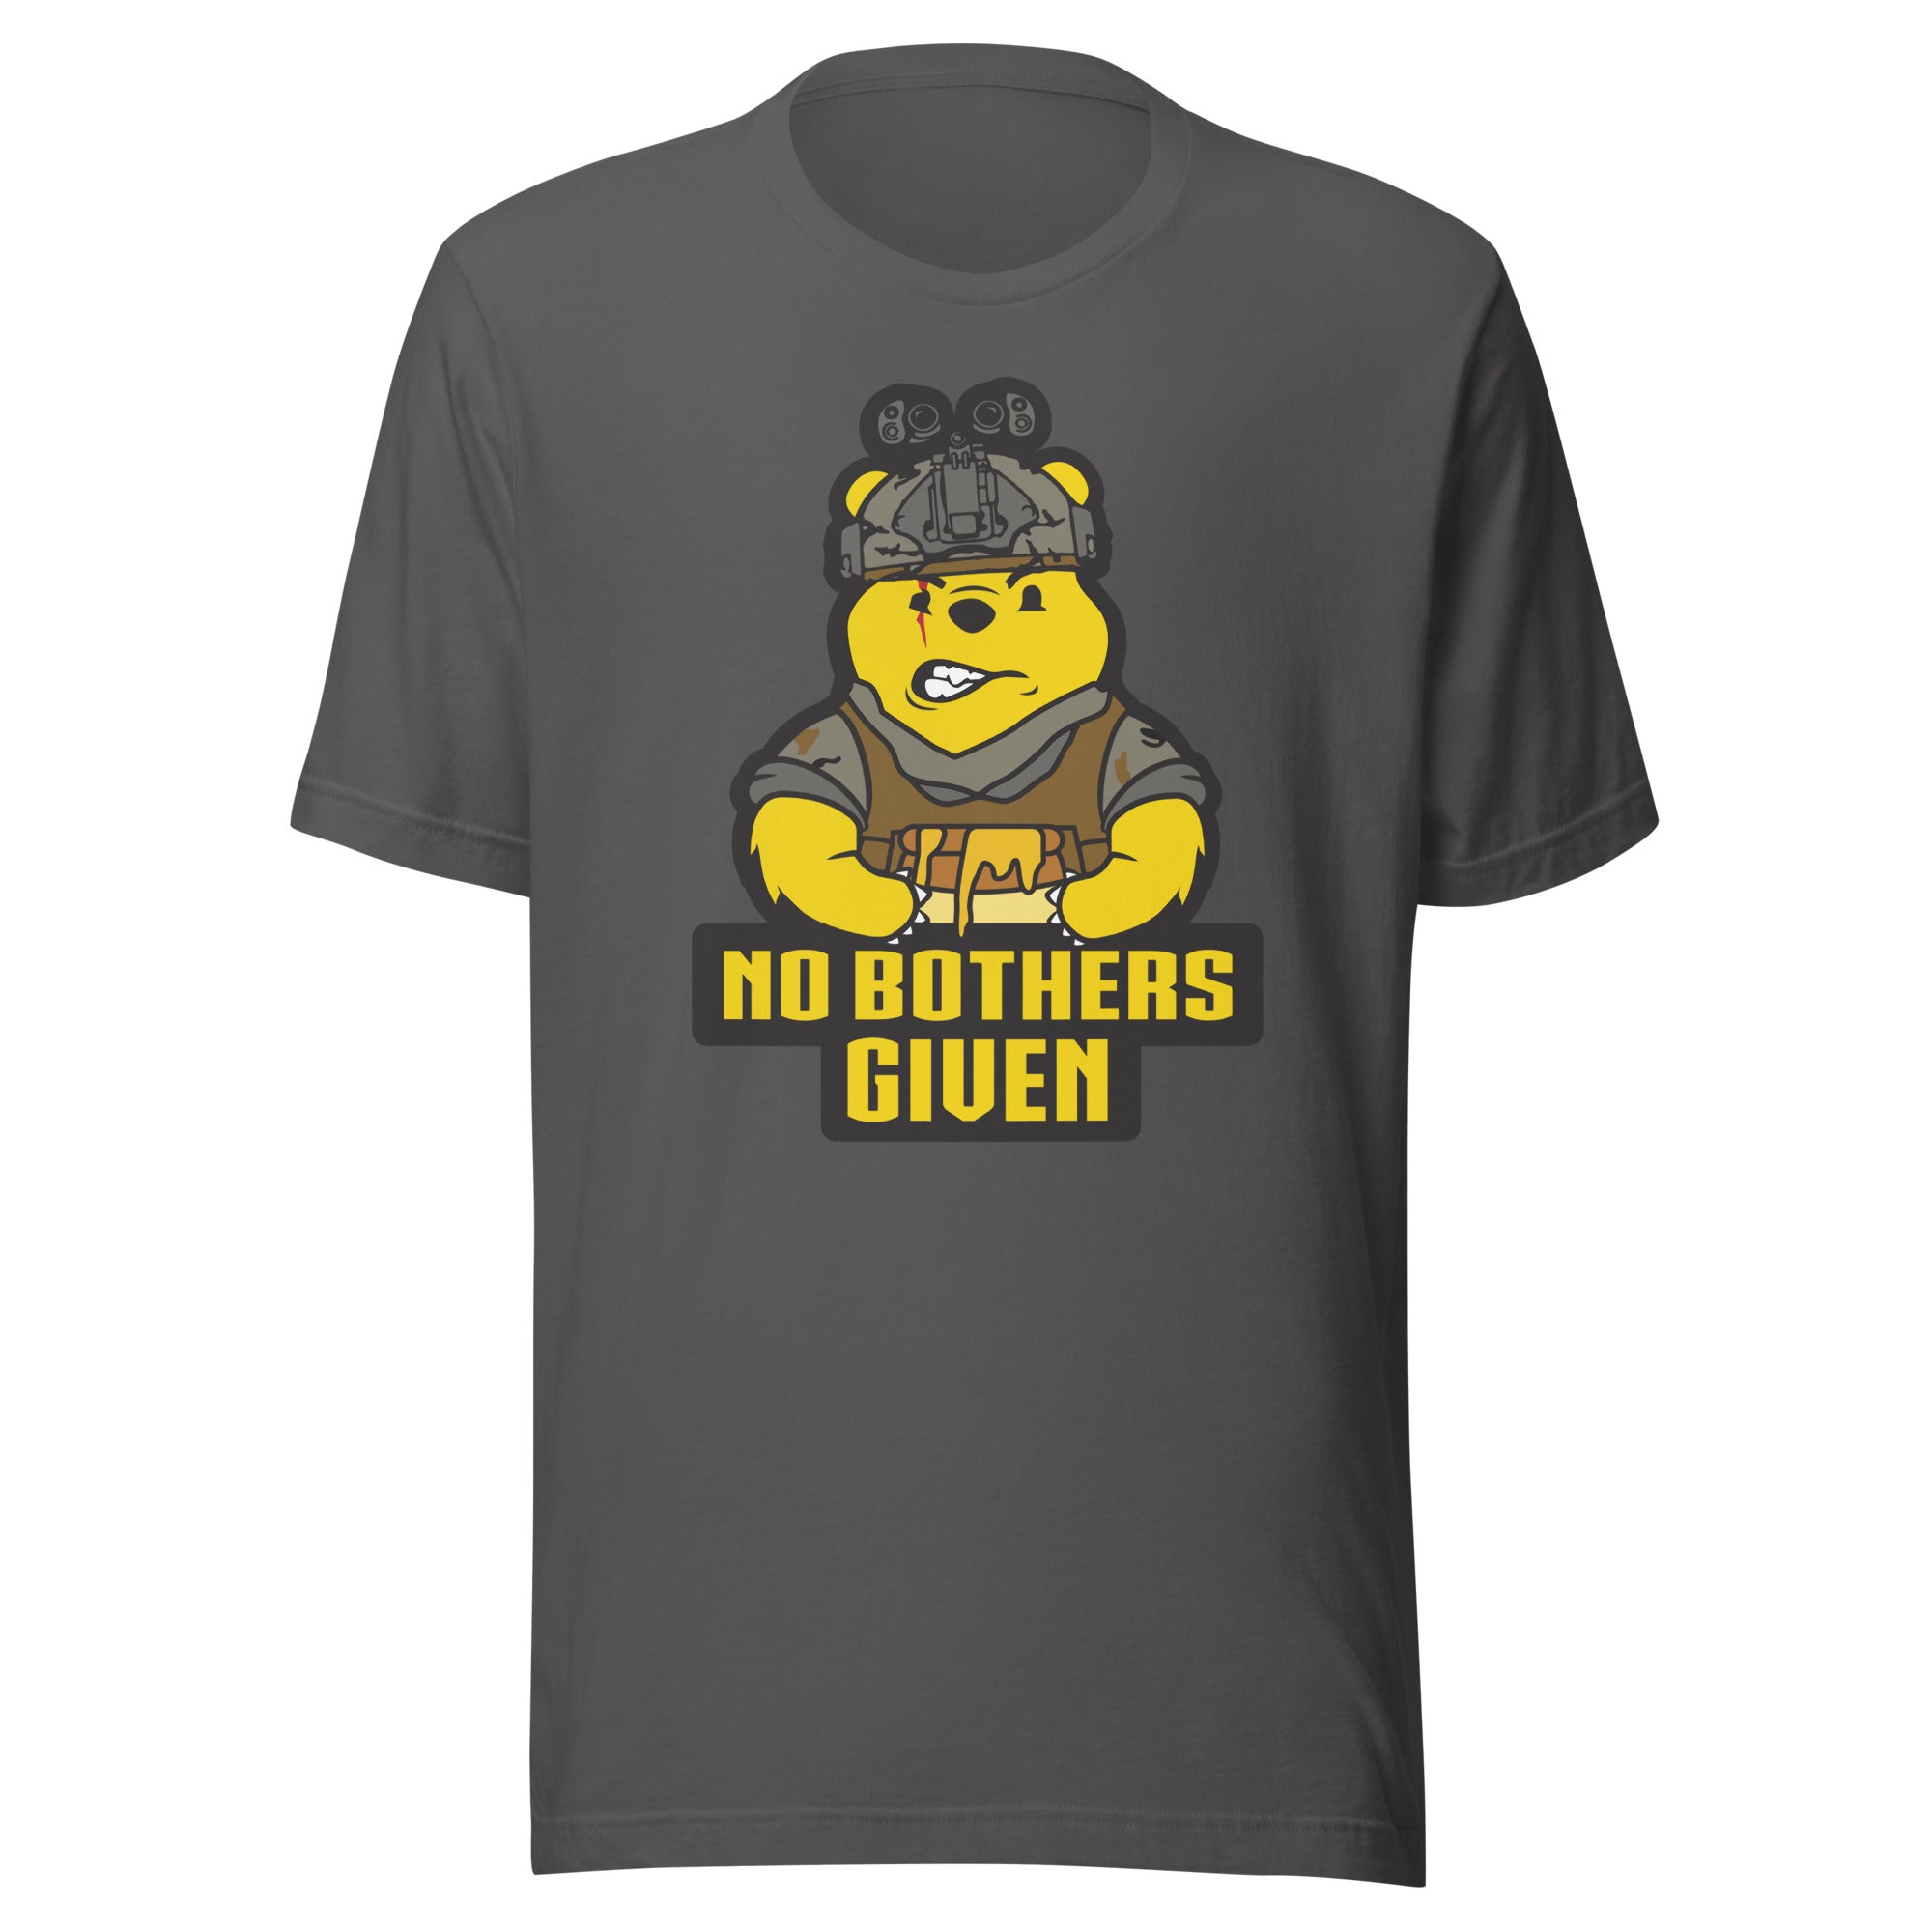 No Bothers Given - Unisex t-shirt